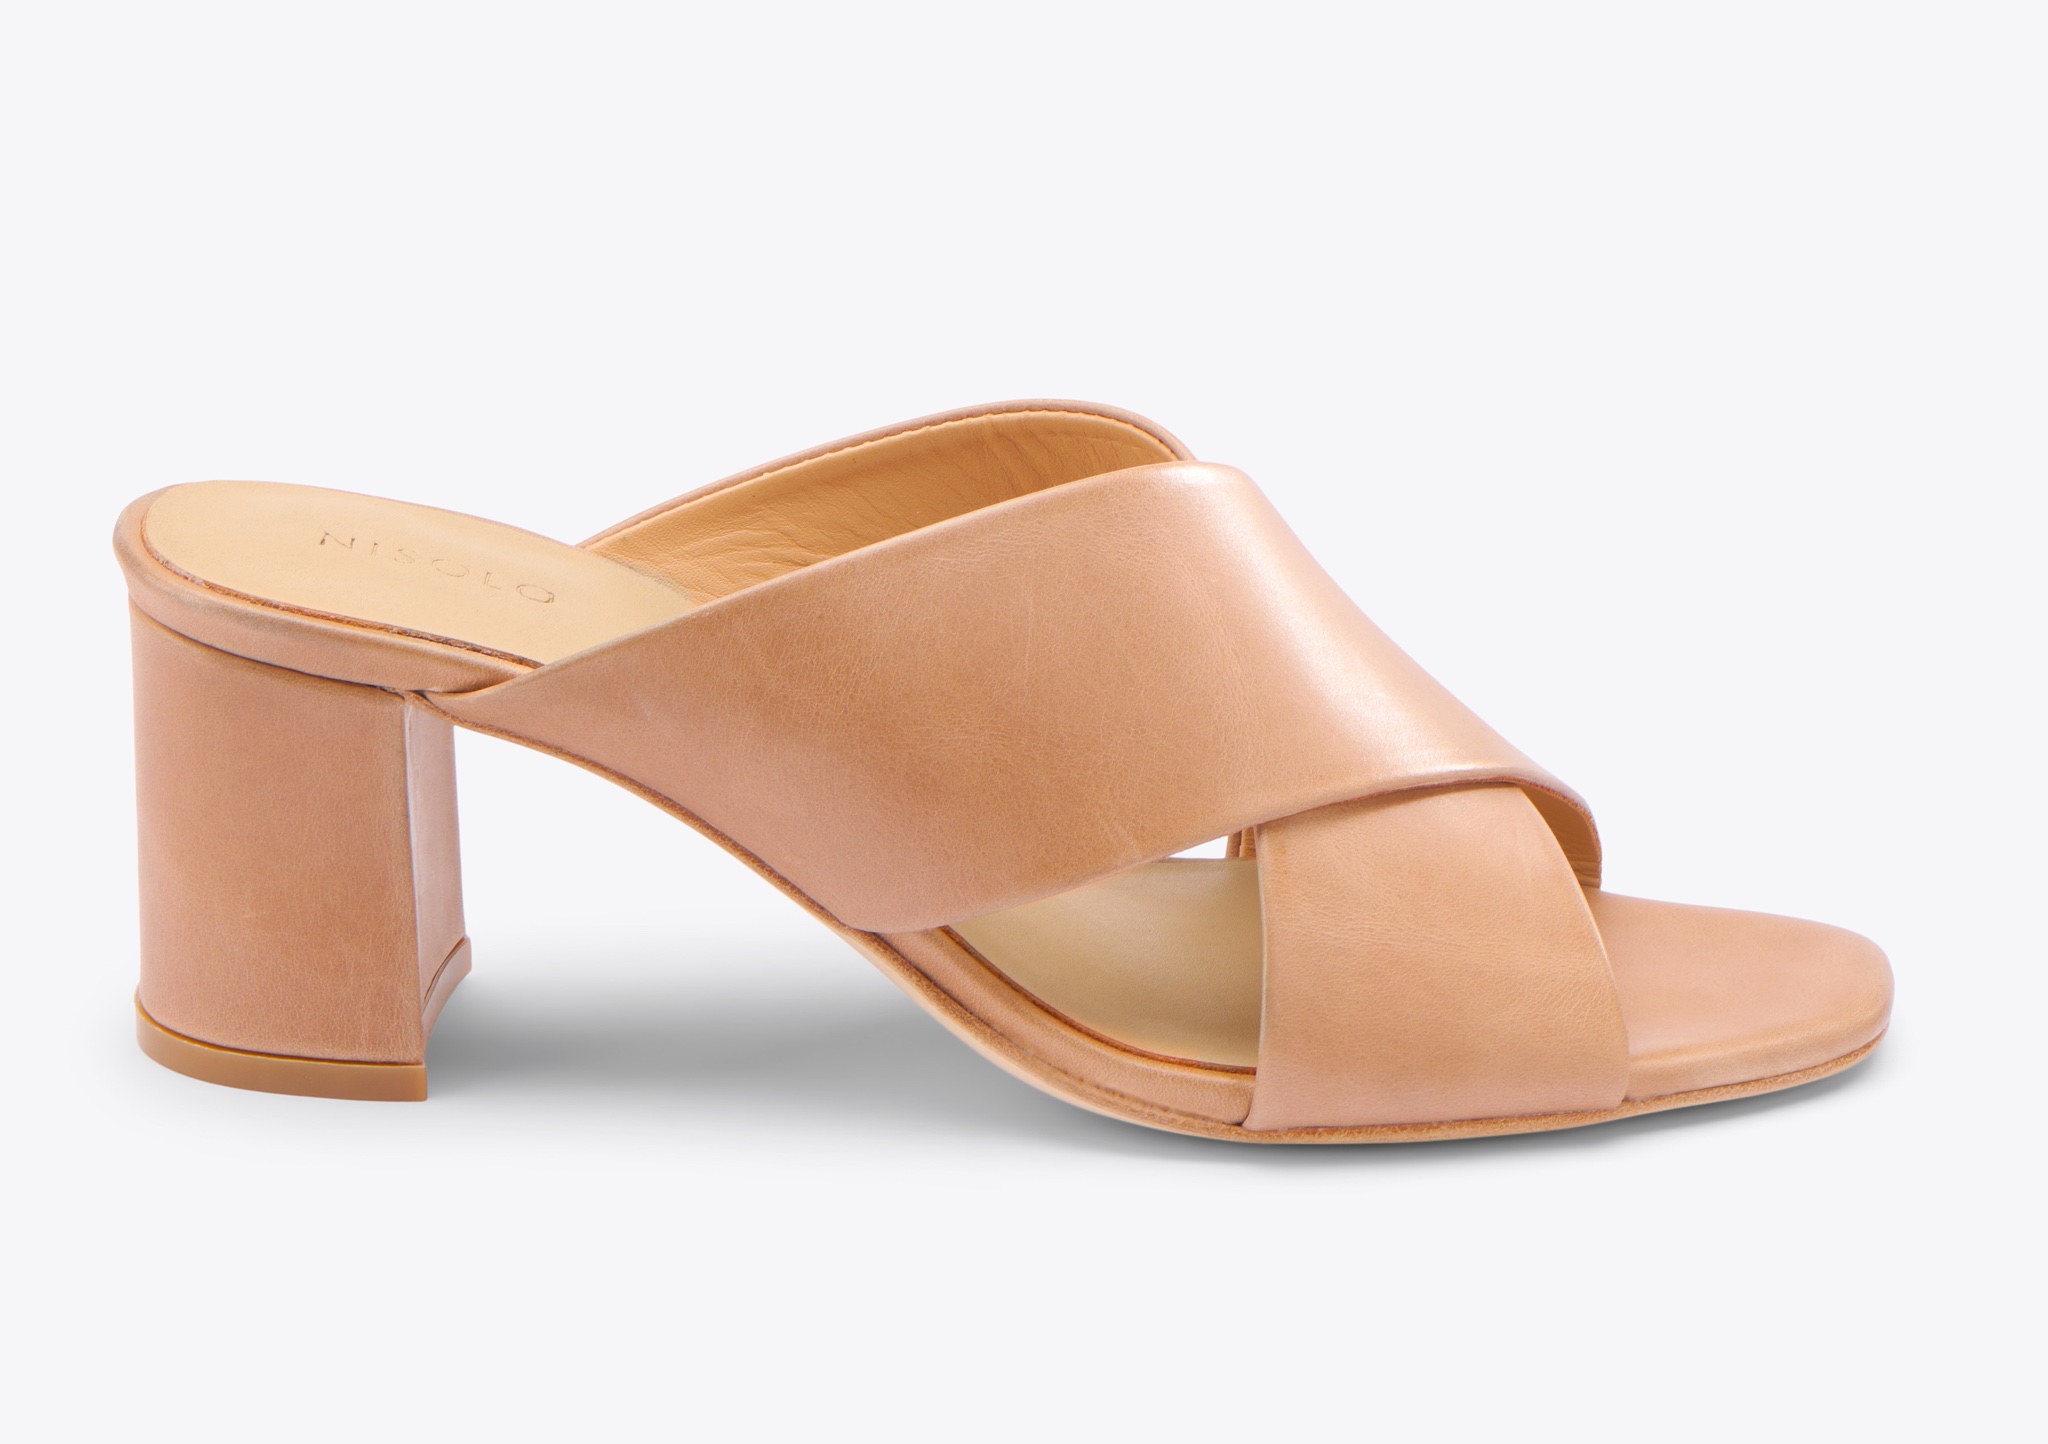 Nisolo Carina Cross Strap Mule Almond - Every Nisolo product is built on the foundation of comfort, function, and design. 